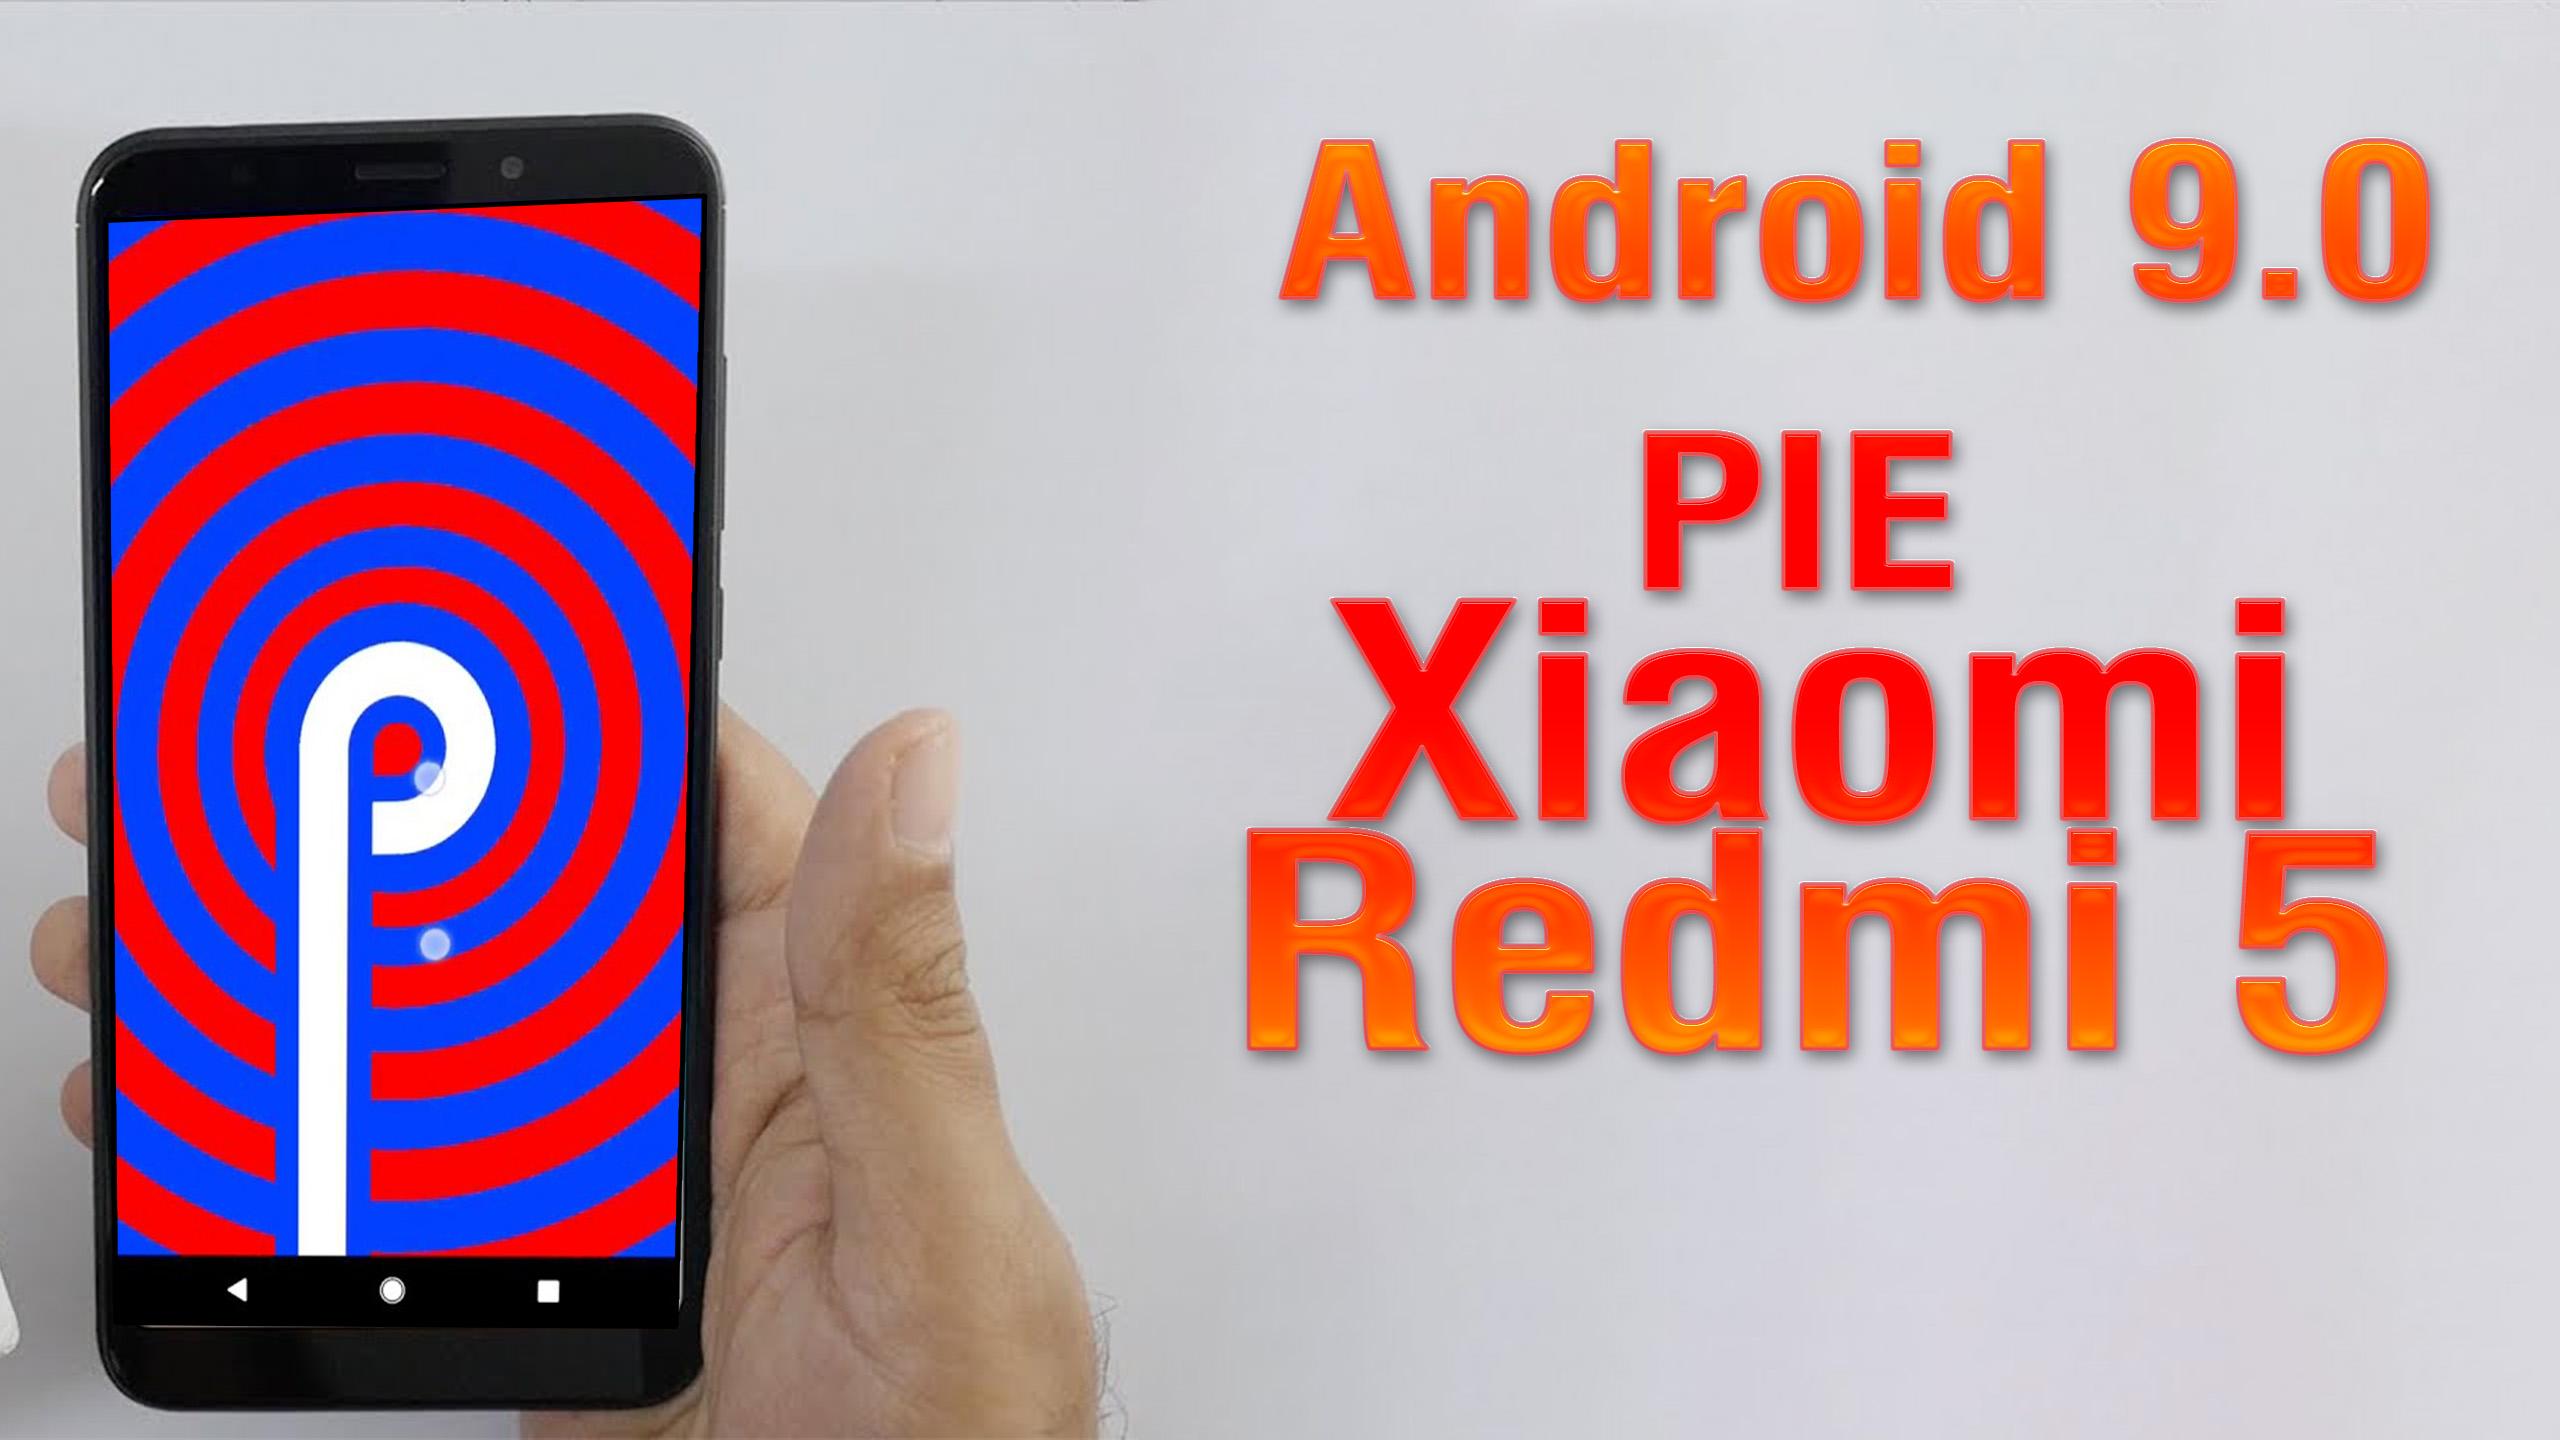 Install Android 90 Pie On Xiaomi Redmi 6 Pro Lineageos 16 How To Guide The Upgrade Guide 0816